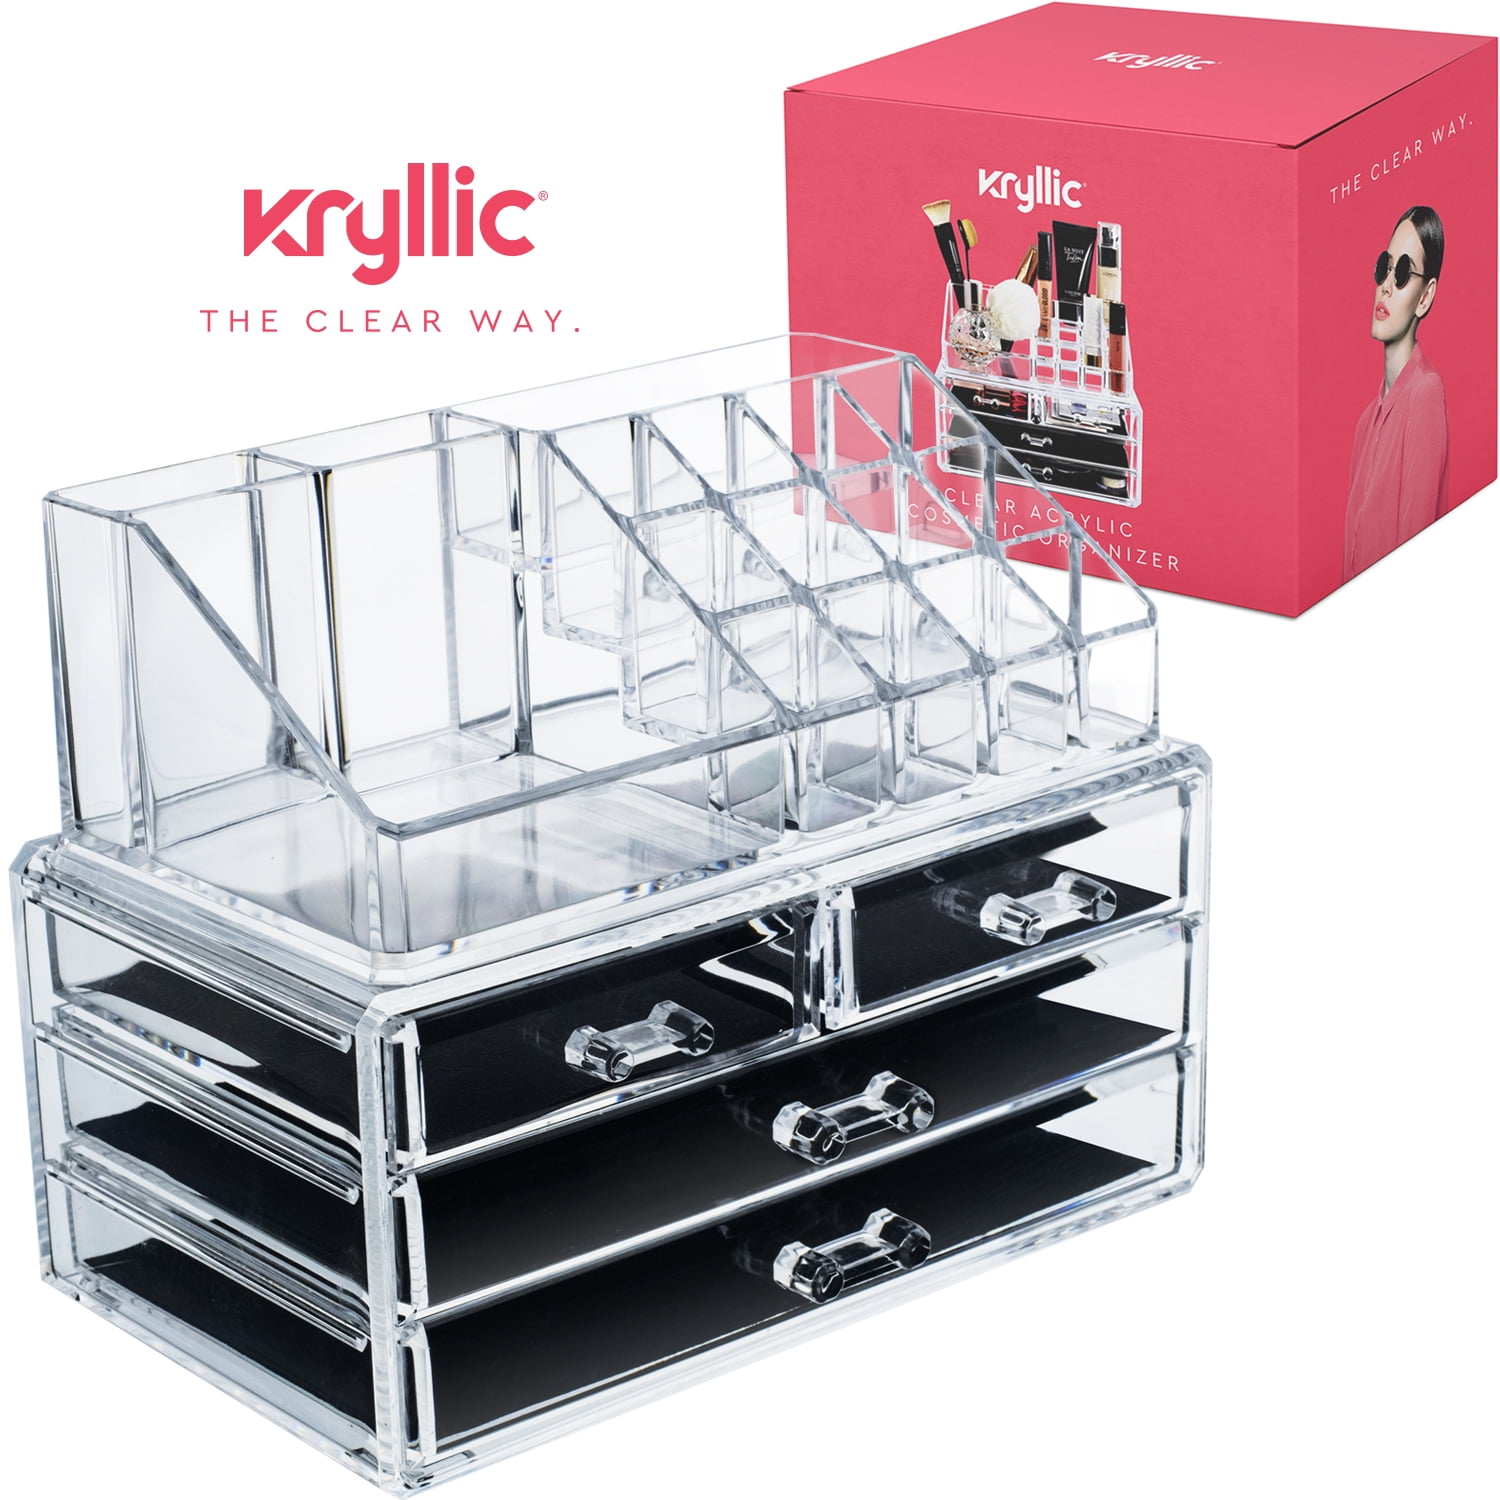 patroon Gehakt horizon Acrylic Makeup jewelry cosmetic organizer - Set of 4 Extra Deep Drawers  That Open & close Easily With Seprate Stackable lipstick & nailpolish  Holder &made With the Strong Thick Acrylic - Walmart.com